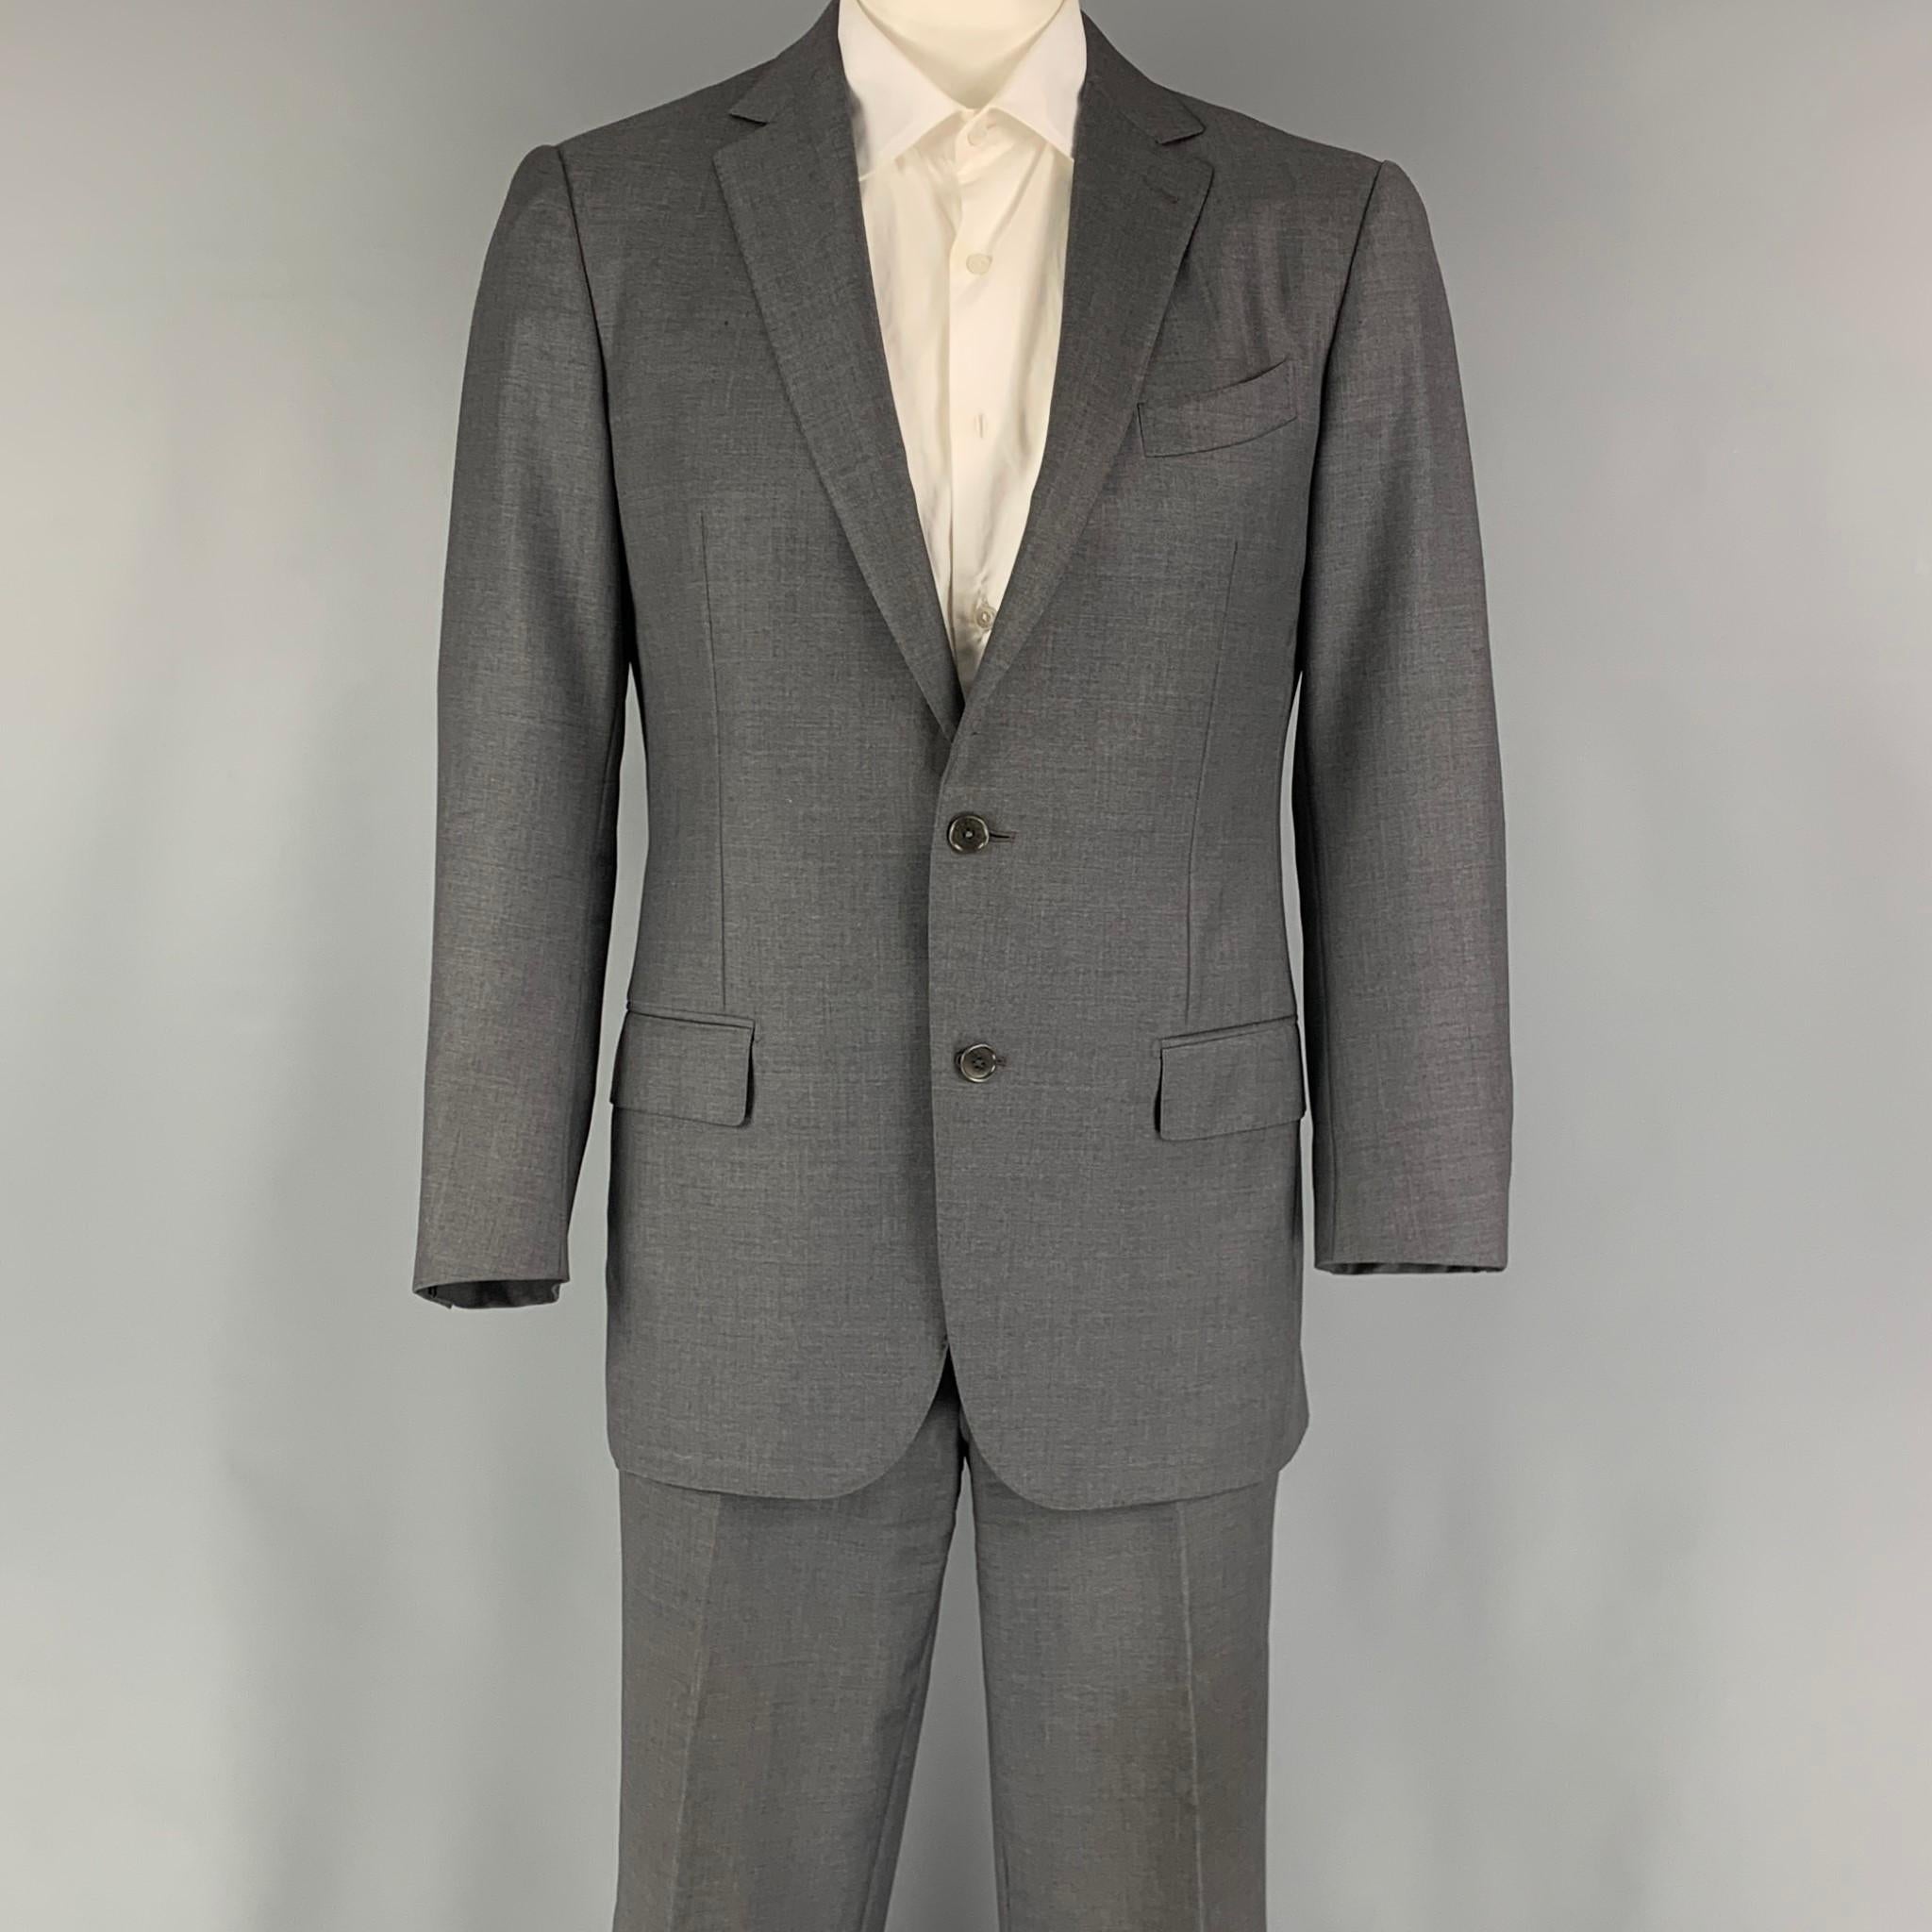 ERMENEGILDO ZEGNA suit comes in a grey wool woven material and includes a single breasted, double button sport coat with a notch lapel and matching flat front trousers.

Very Good Pre-Owned Condition.
Marked: 52 R

Measurements:

-Jacket
Shoulder: